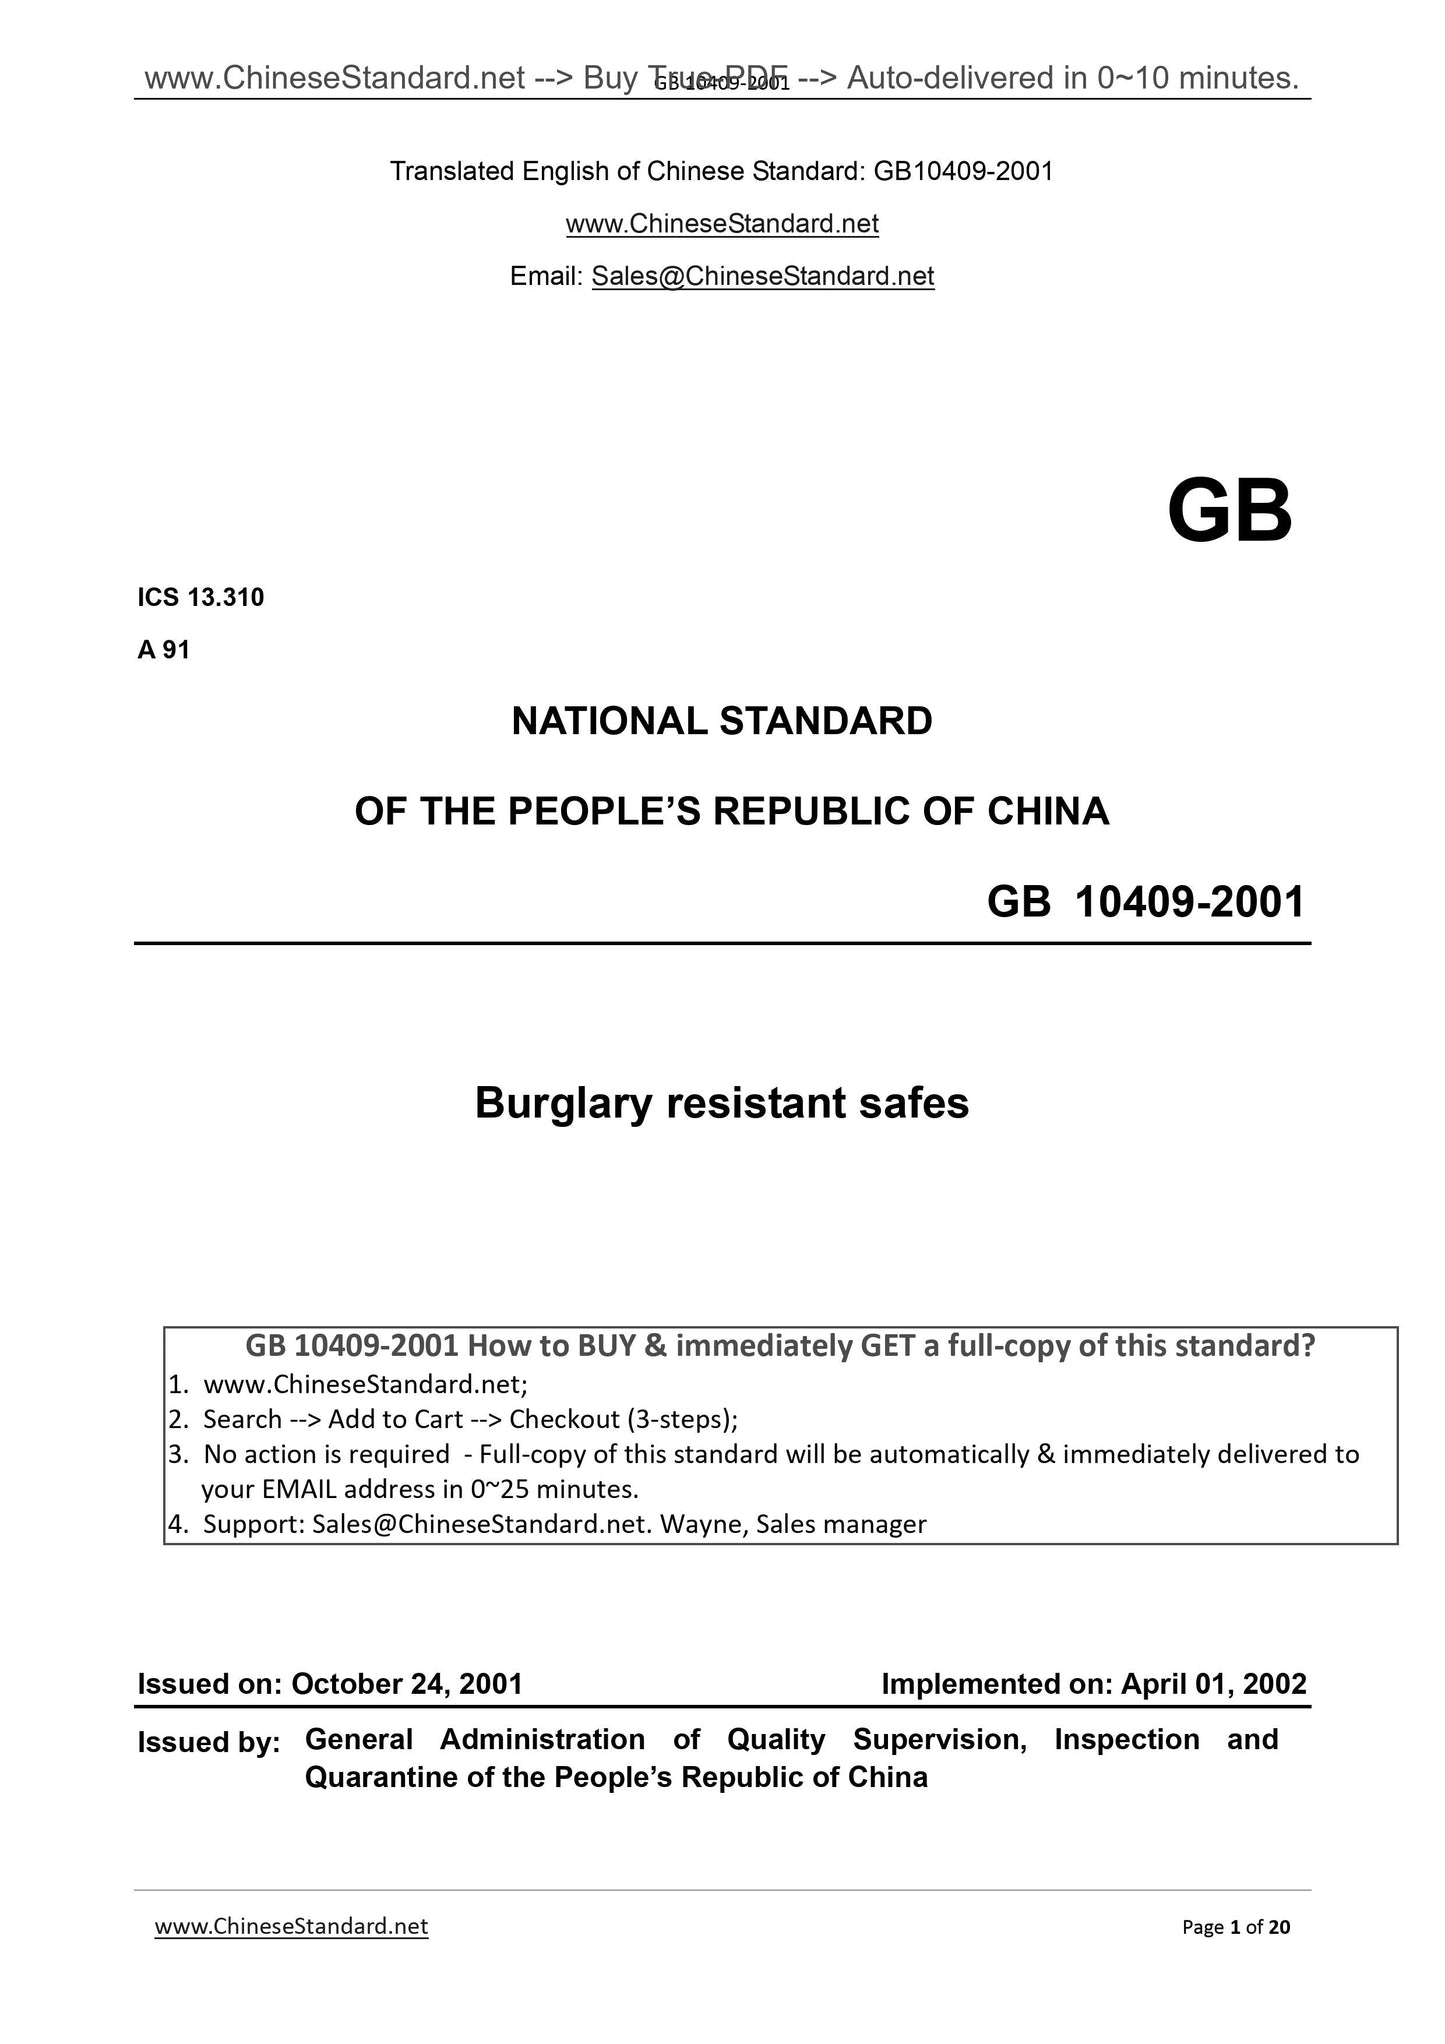 GB 10409-2001 Page 1